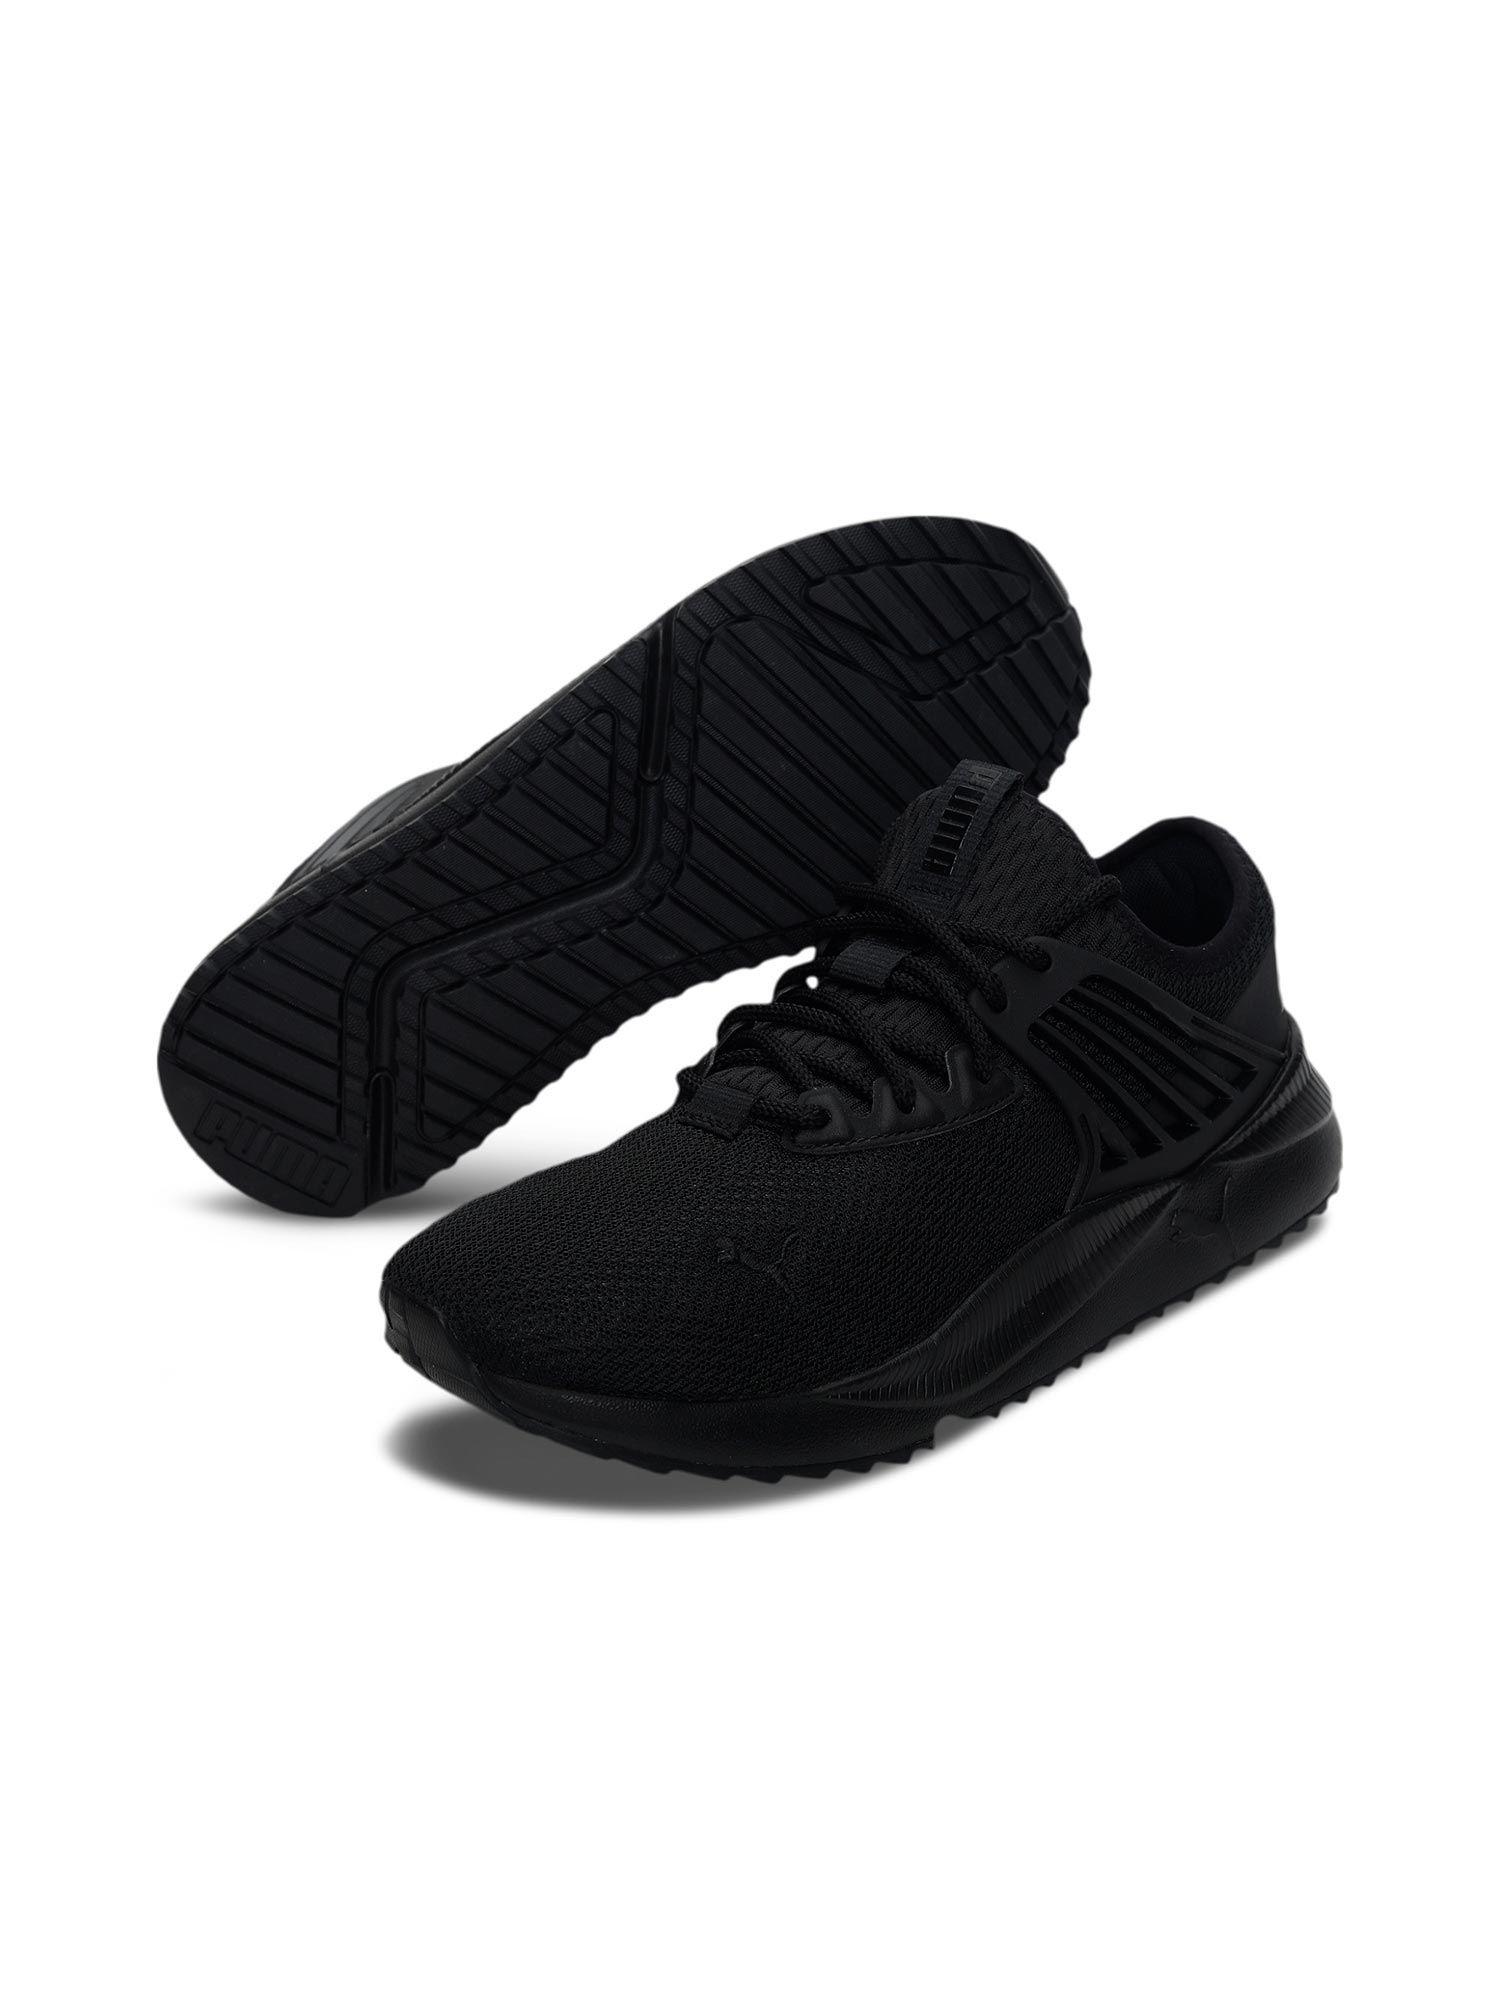 pacer future unisex black running shoes